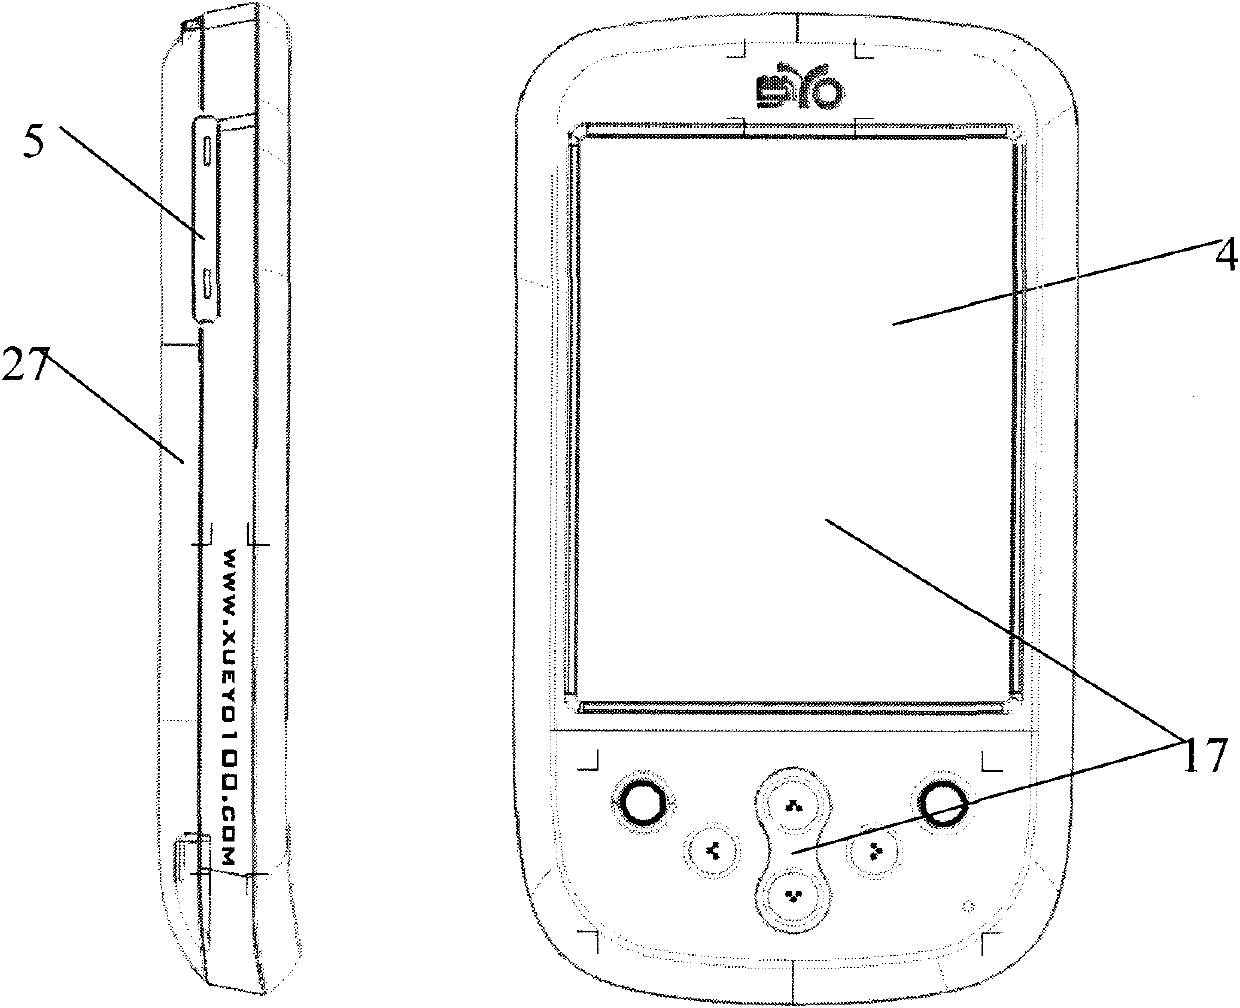 Hand-held study diagnosis and analysis device